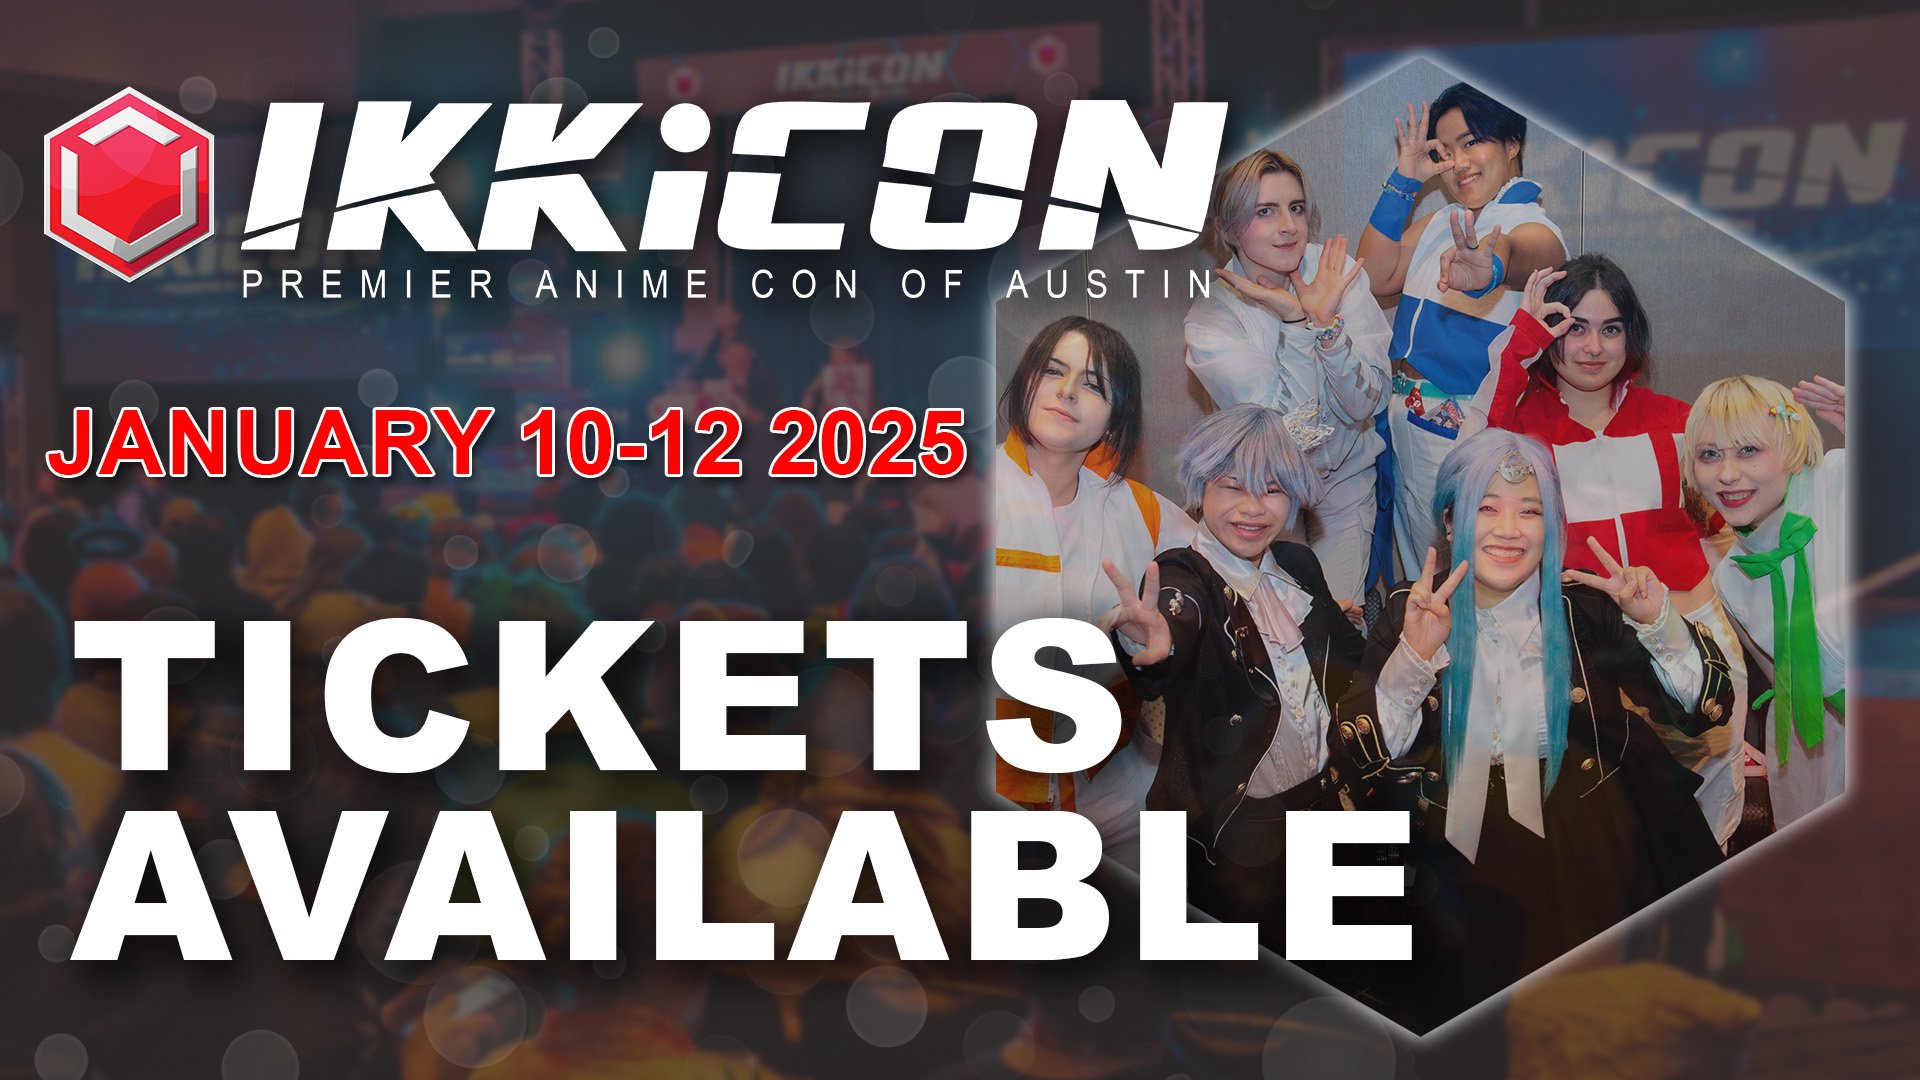 🎉 Get ready for an epic adventure! Tickets for IKKiCON, January 10-12, 2025, are officially on sale! Don't miss out on the ultimate anime experience &ndash; grab your tickets now and join us for a weekend of cosplay, panels, and endless fun! #IKKiCO